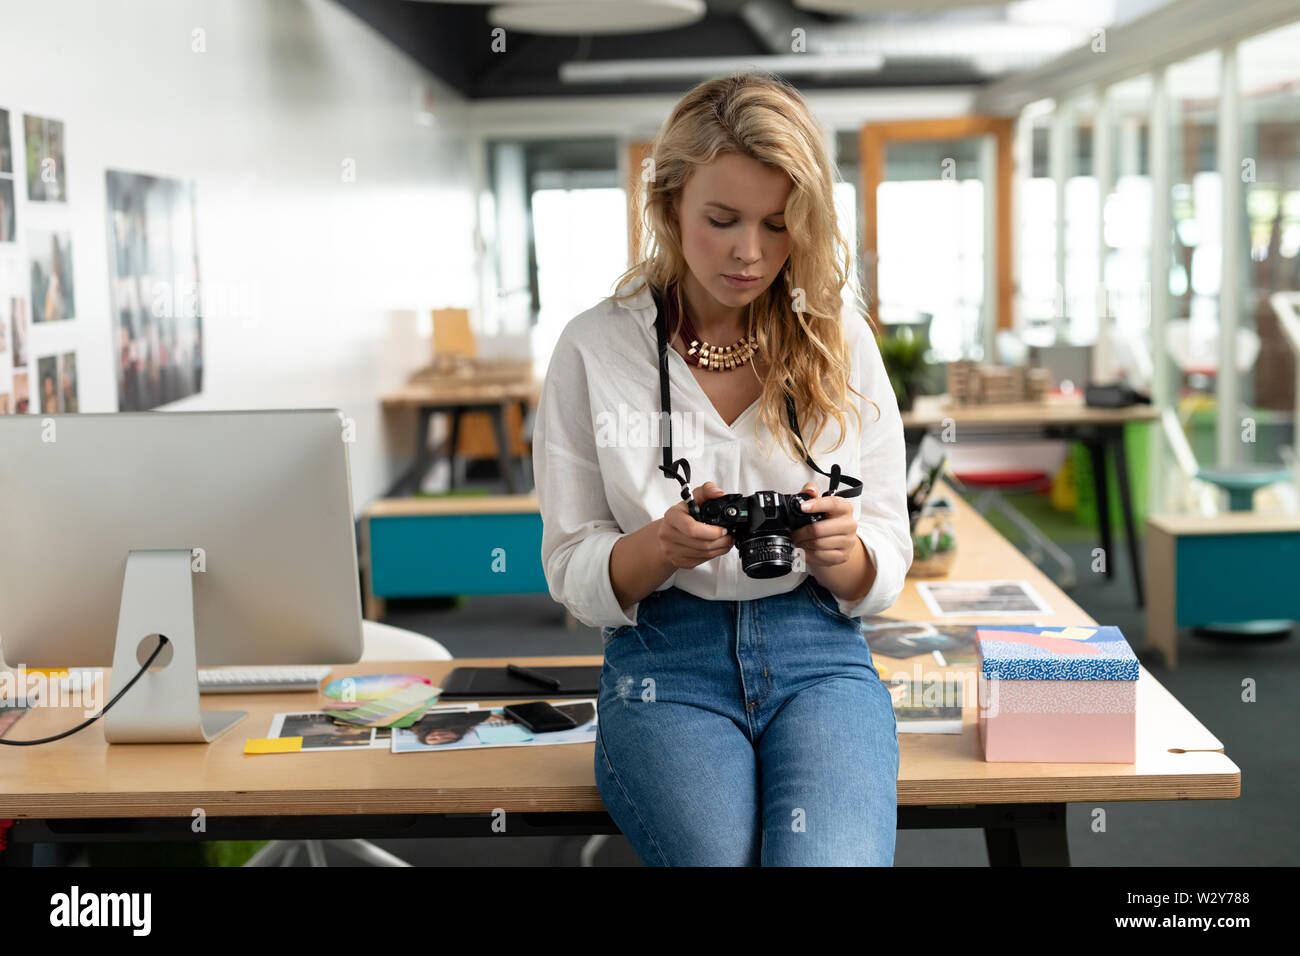 Female graphic designer reviewing photos on digital camera at desk Stock Photo